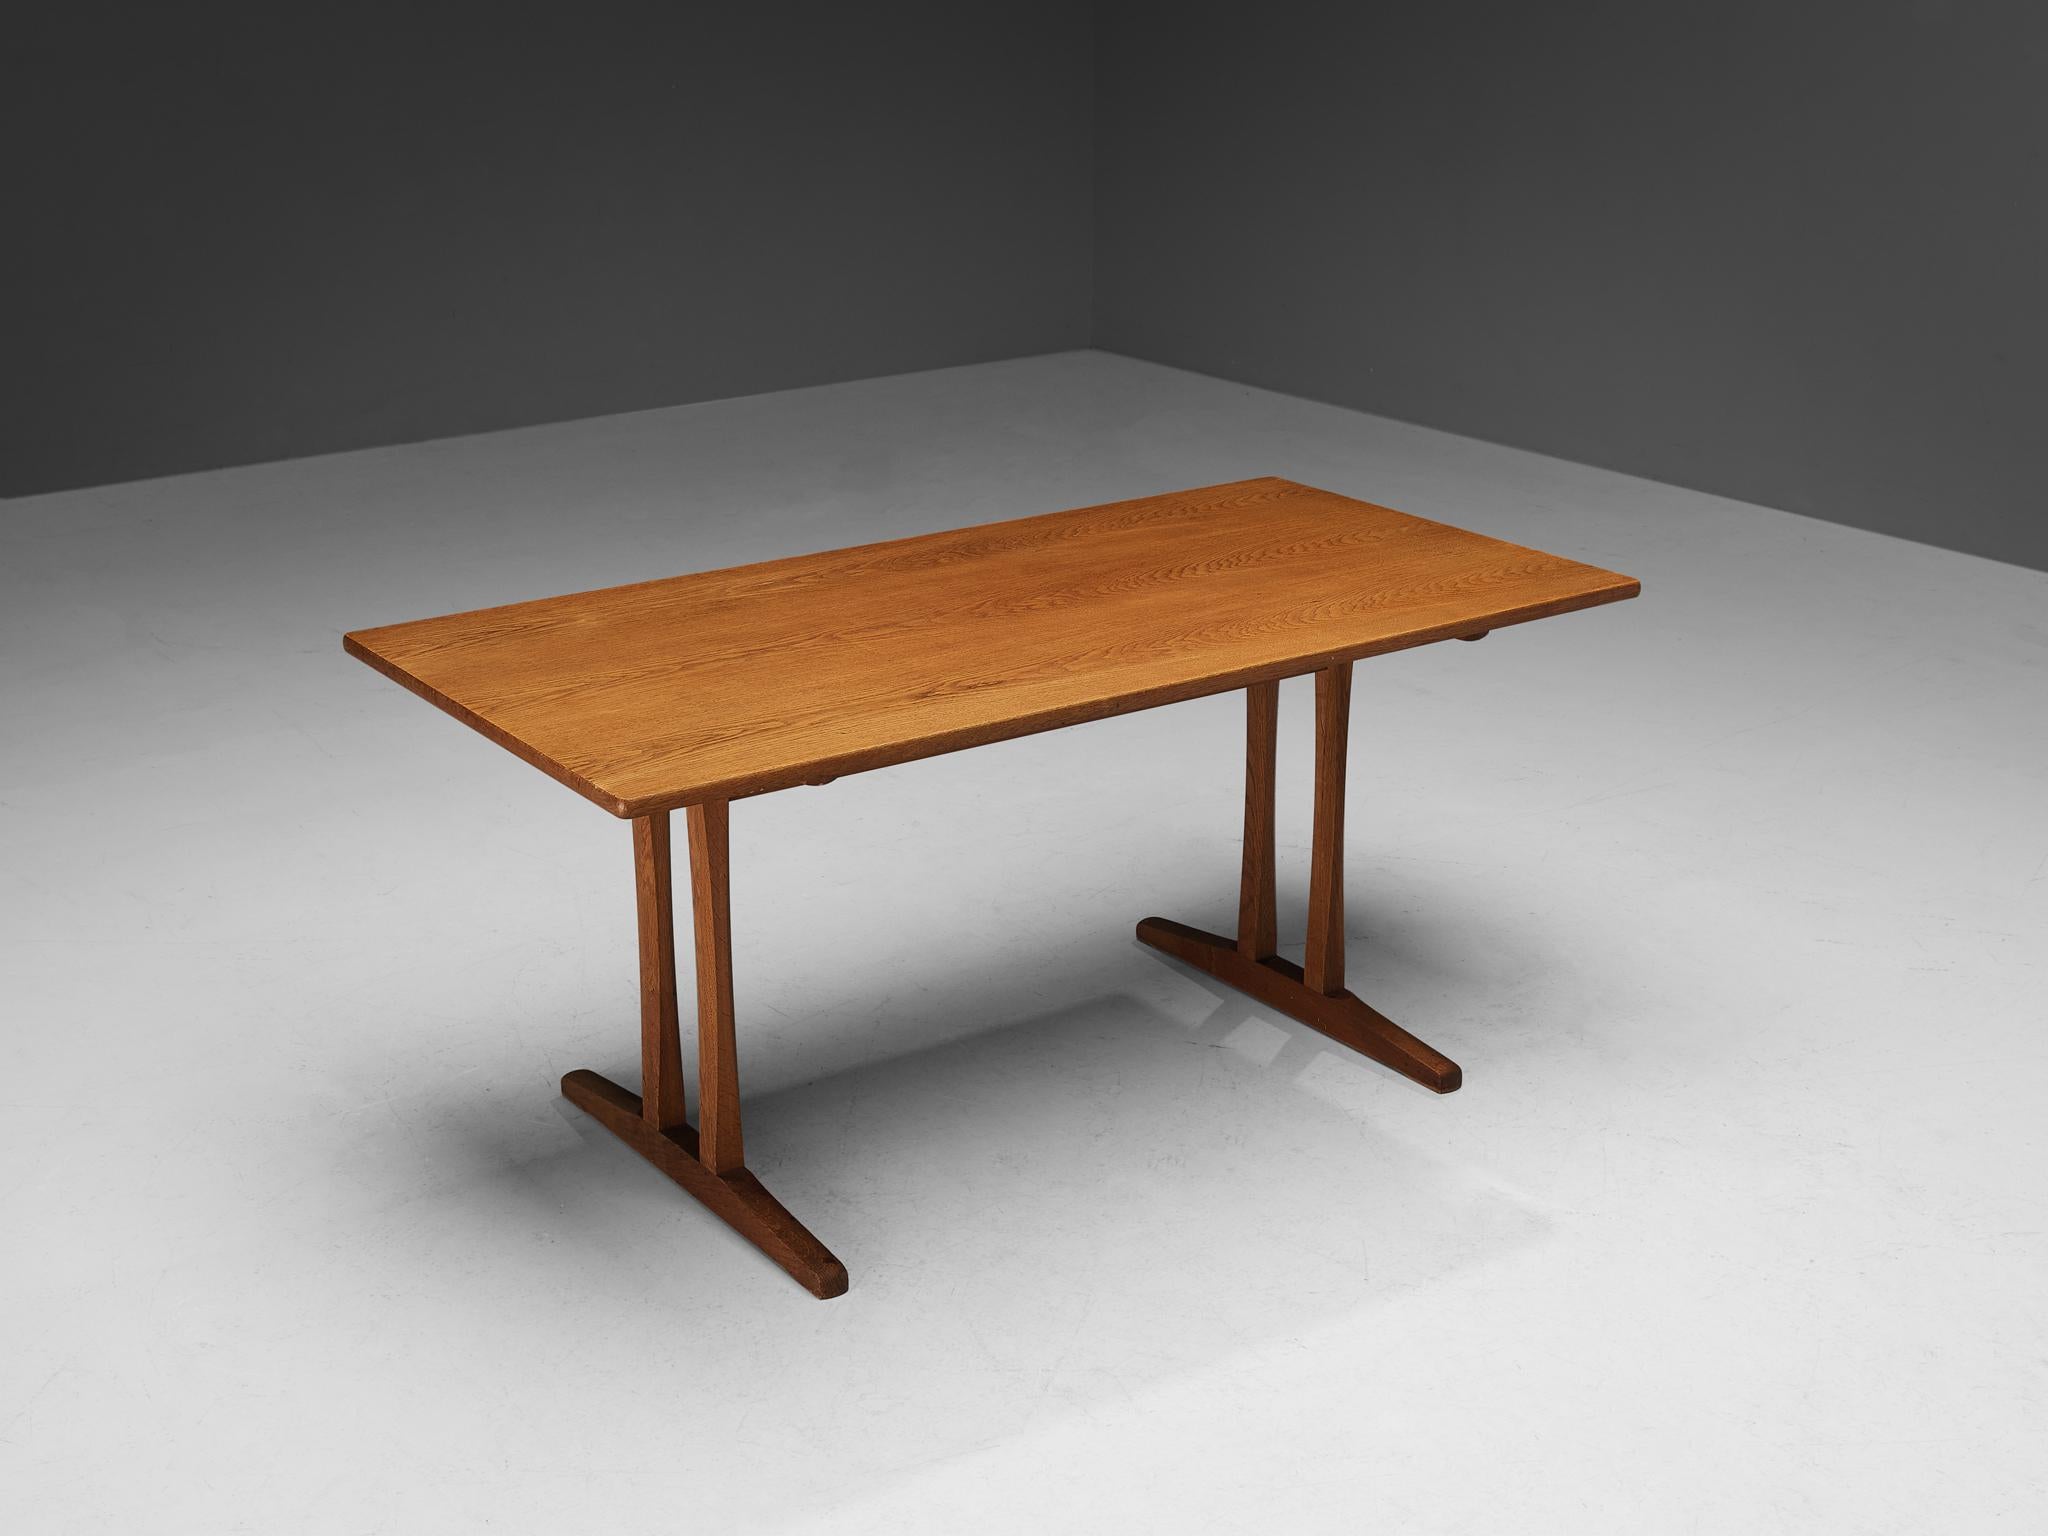 Børge Mogensen for Fredericia Stolefabrik, dining table model '6289', oak, Denmark, 1966

Børge Mogensen designed this dining table in 1966 for Fredericia Stolefabrik. The table is made out of solid oak with a beautiful grain pattern.  The